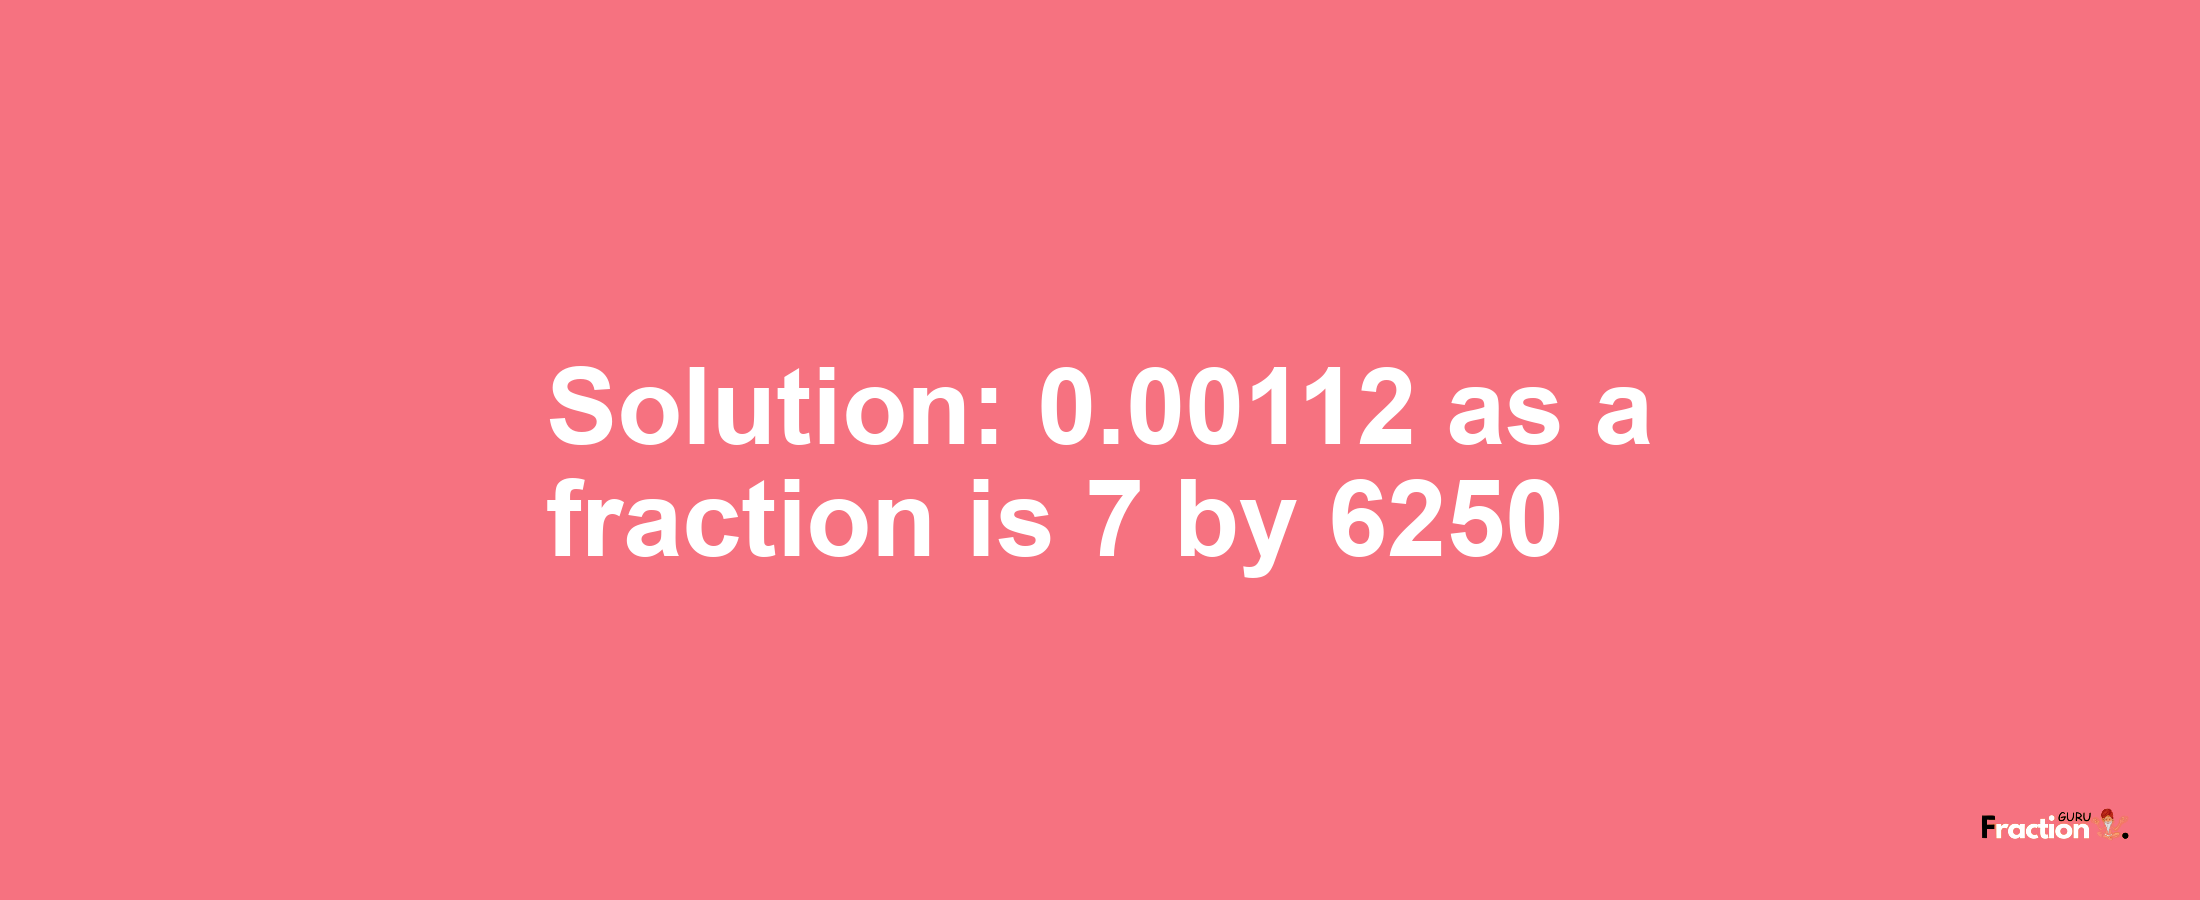 Solution:0.00112 as a fraction is 7/6250